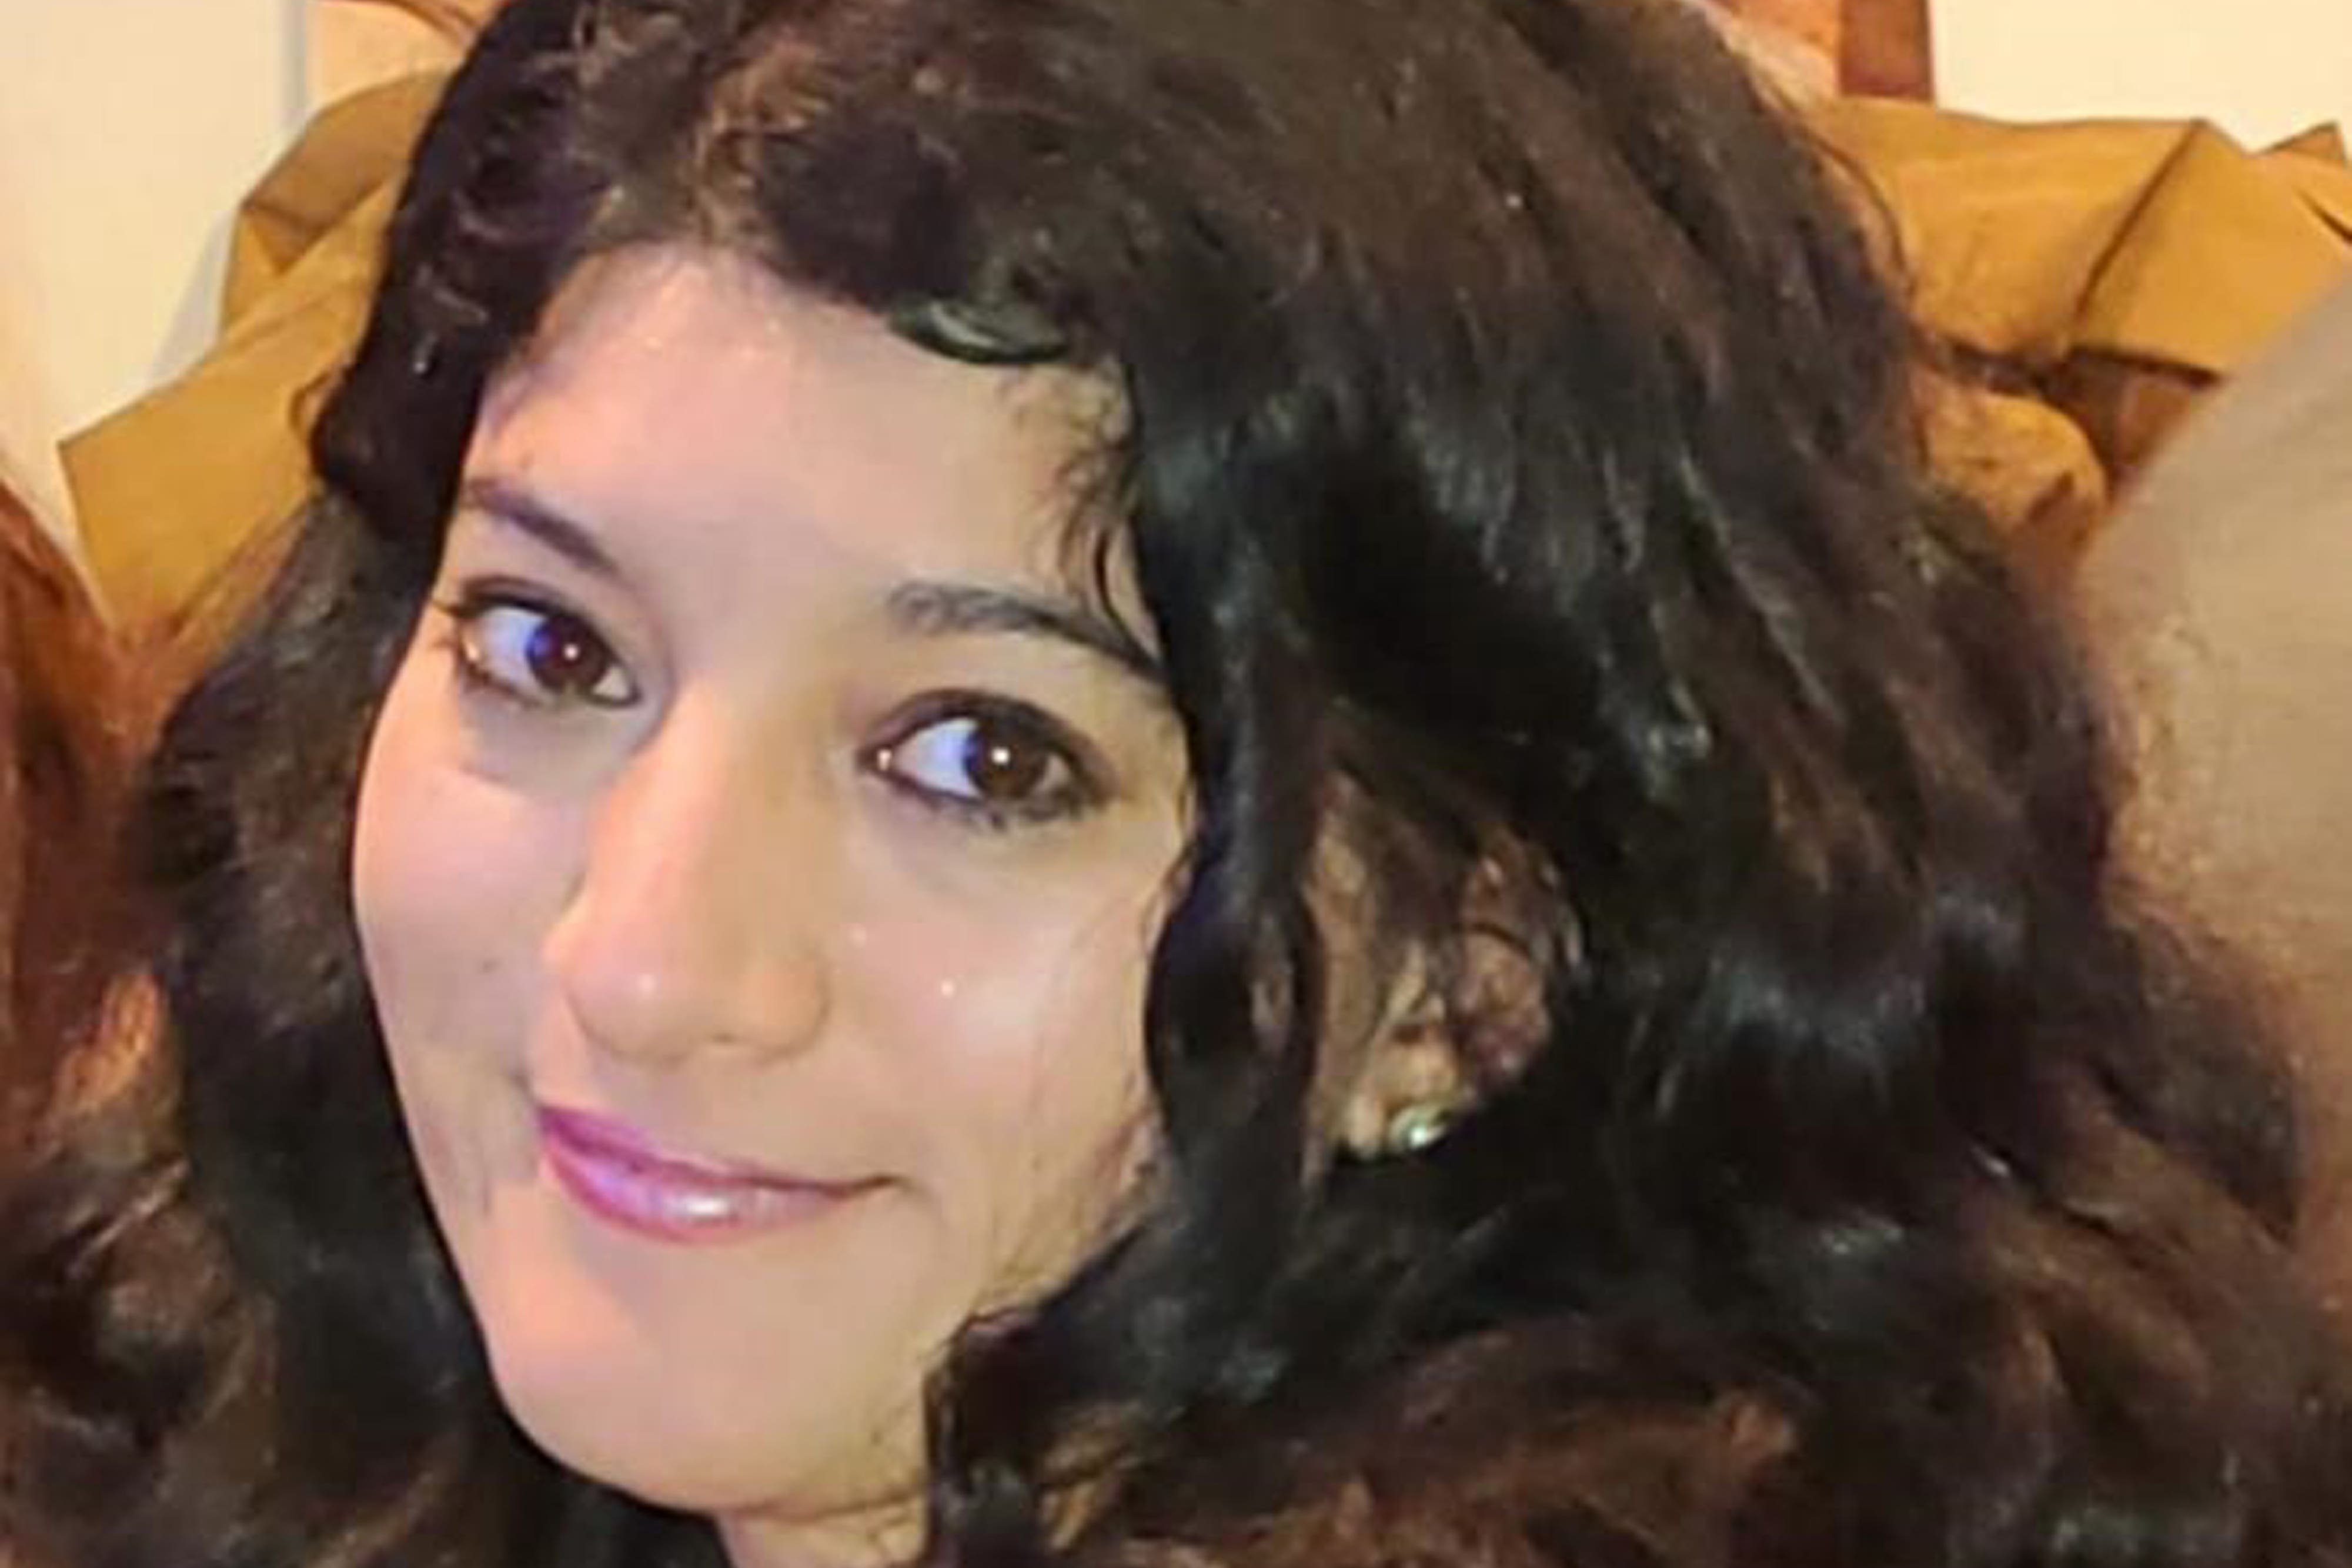 Zara Aleena was murdered while walking home from a night out by Jordan McSweeney